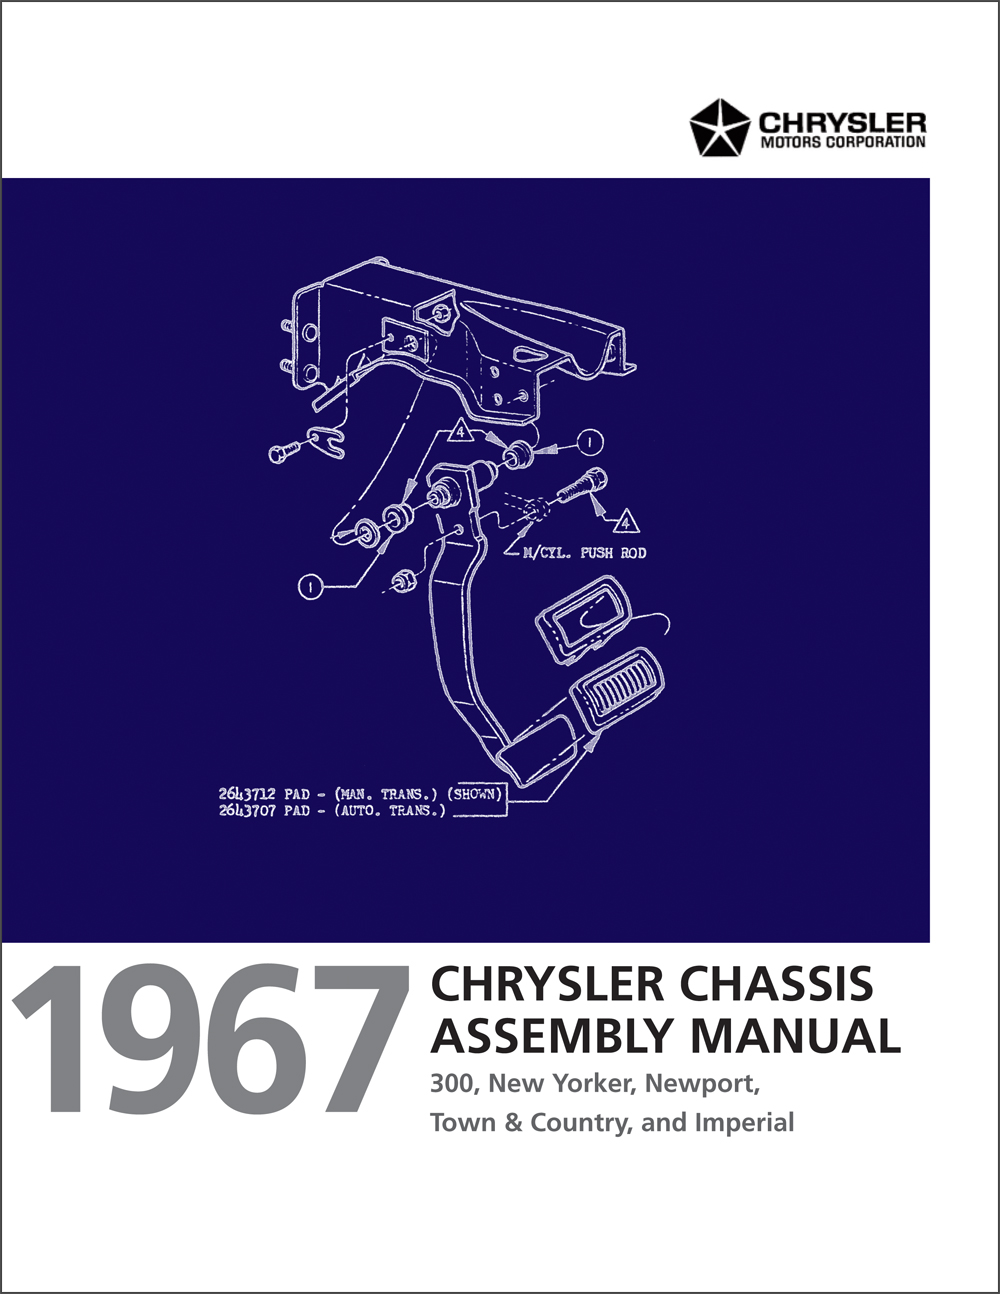 1967 Chrysler Chassis & Engine Equipment Assembly Manual Reprint